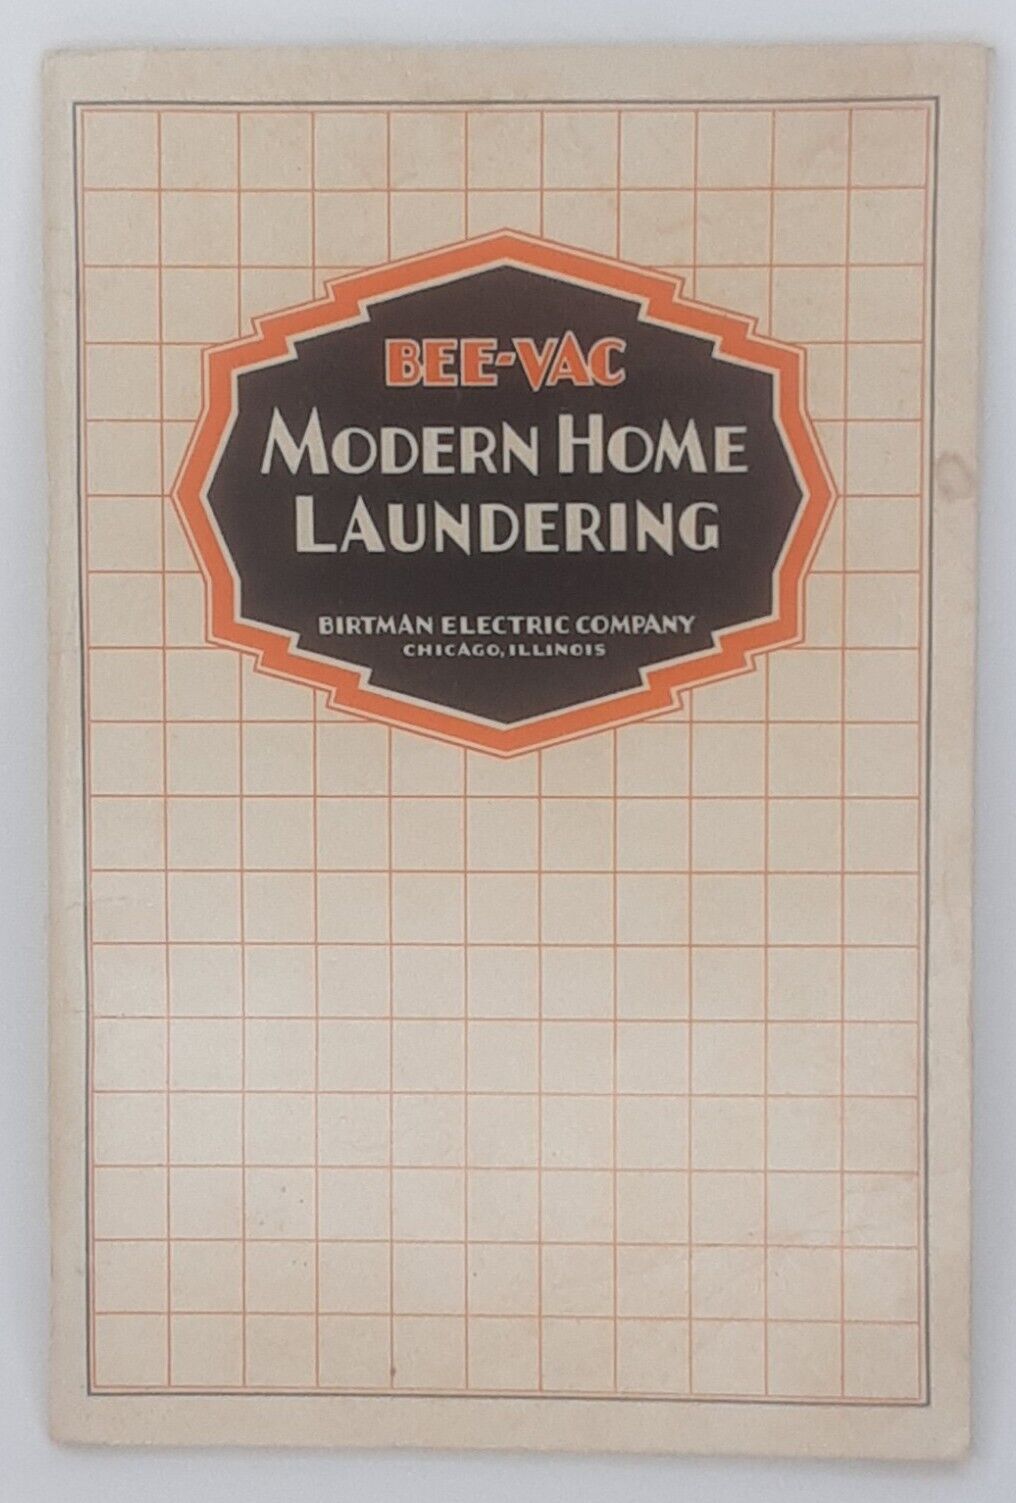 Bee-Vac Modern Home Laundering Birtman Electric Co 1939 Laundry How-To Guide